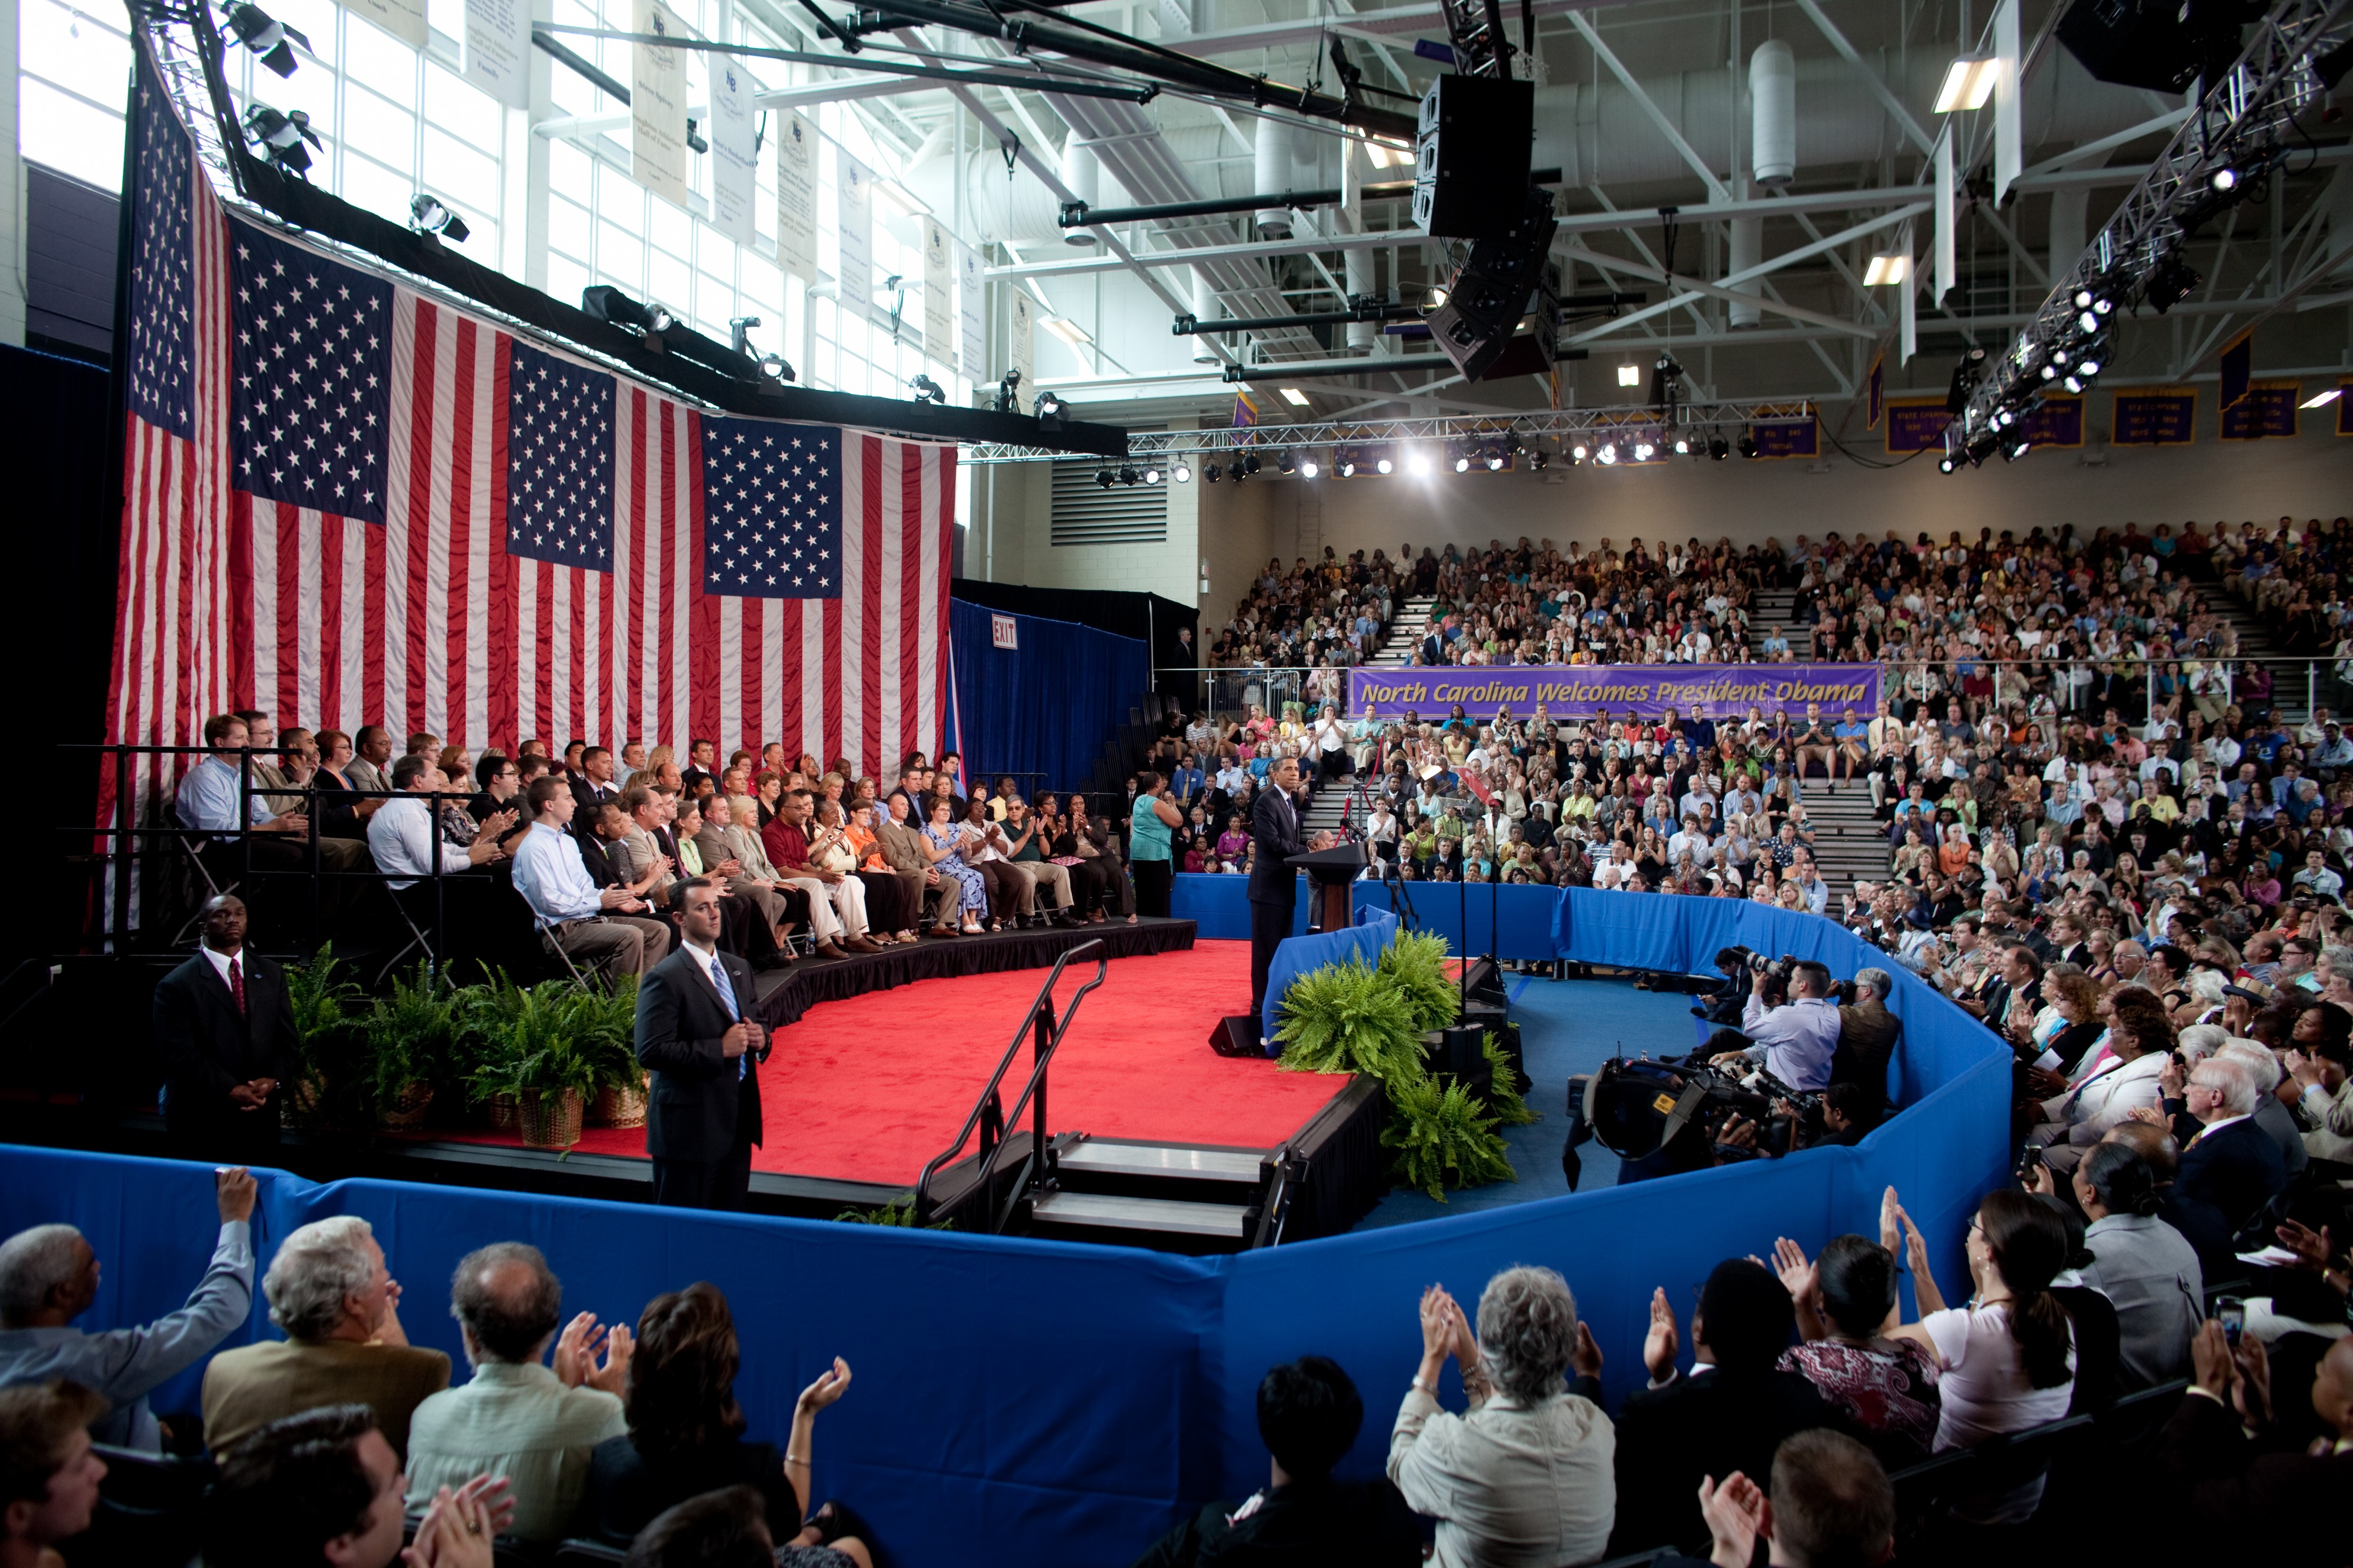 President Barack Obama holds a town hall meeting at Broughton High School in Raleigh, N.C. on July 29, 2009